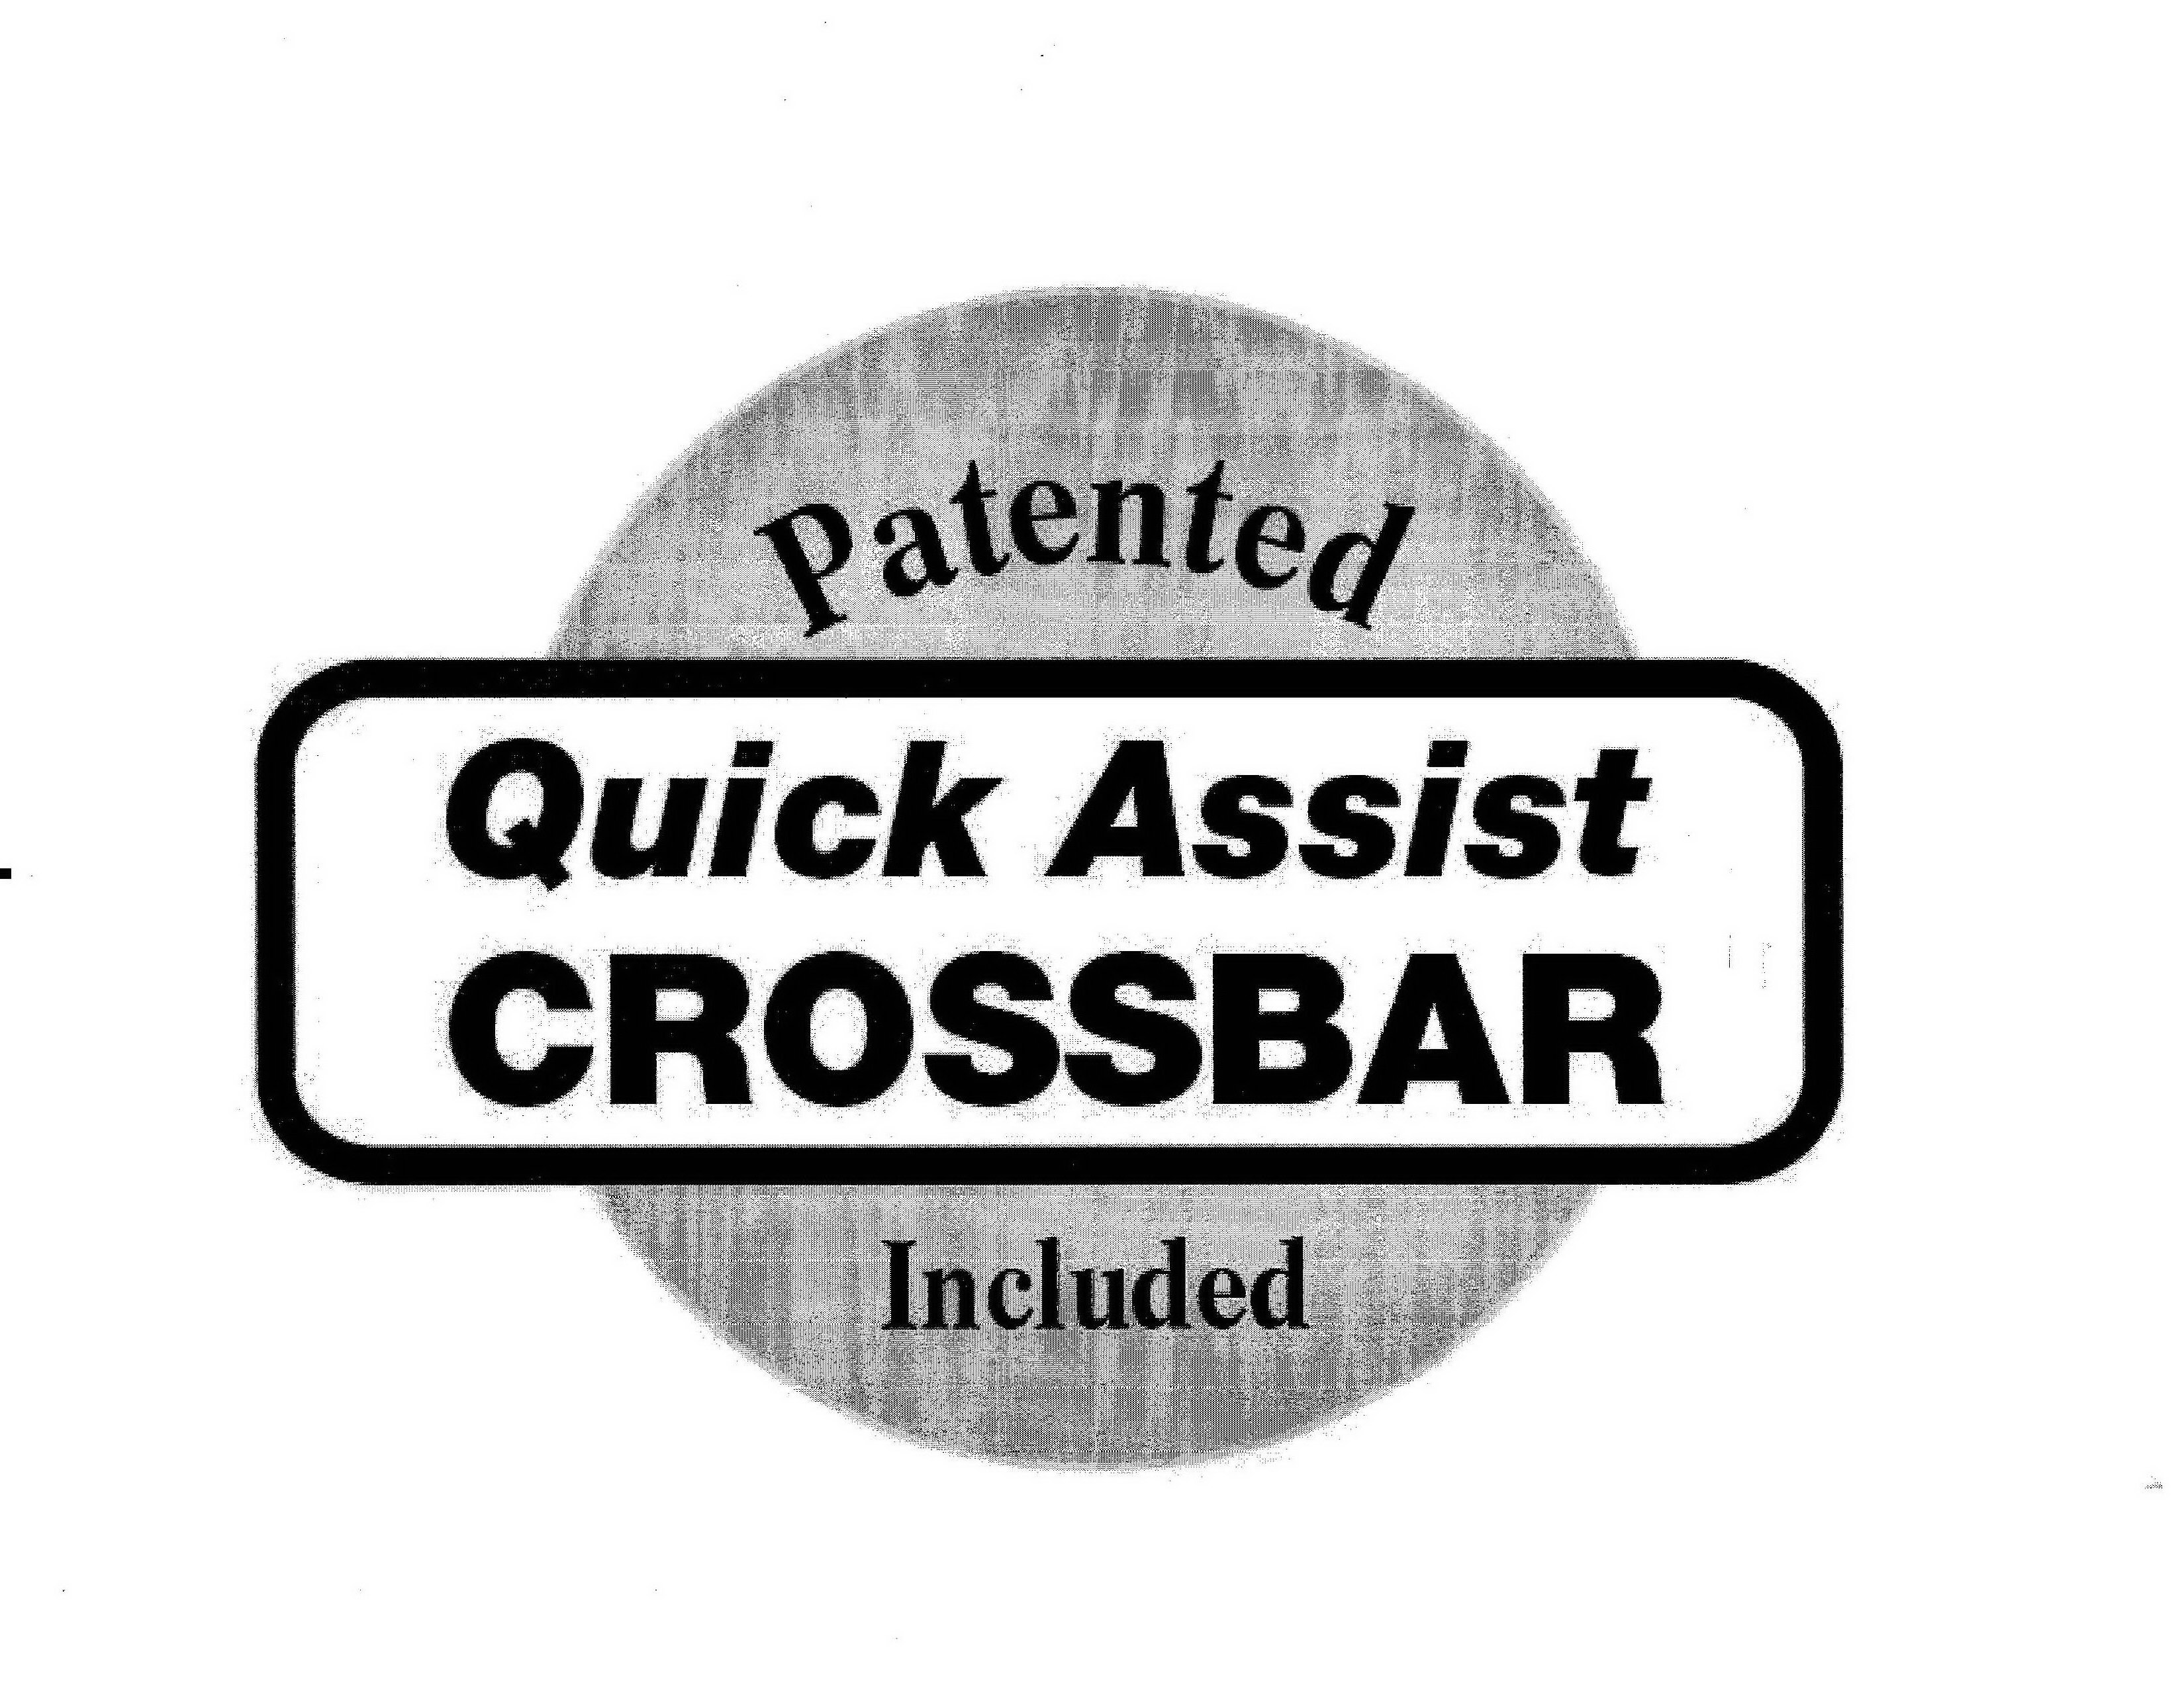  QUICK ASSIST CROSSBAR PATENTED INCLUDED